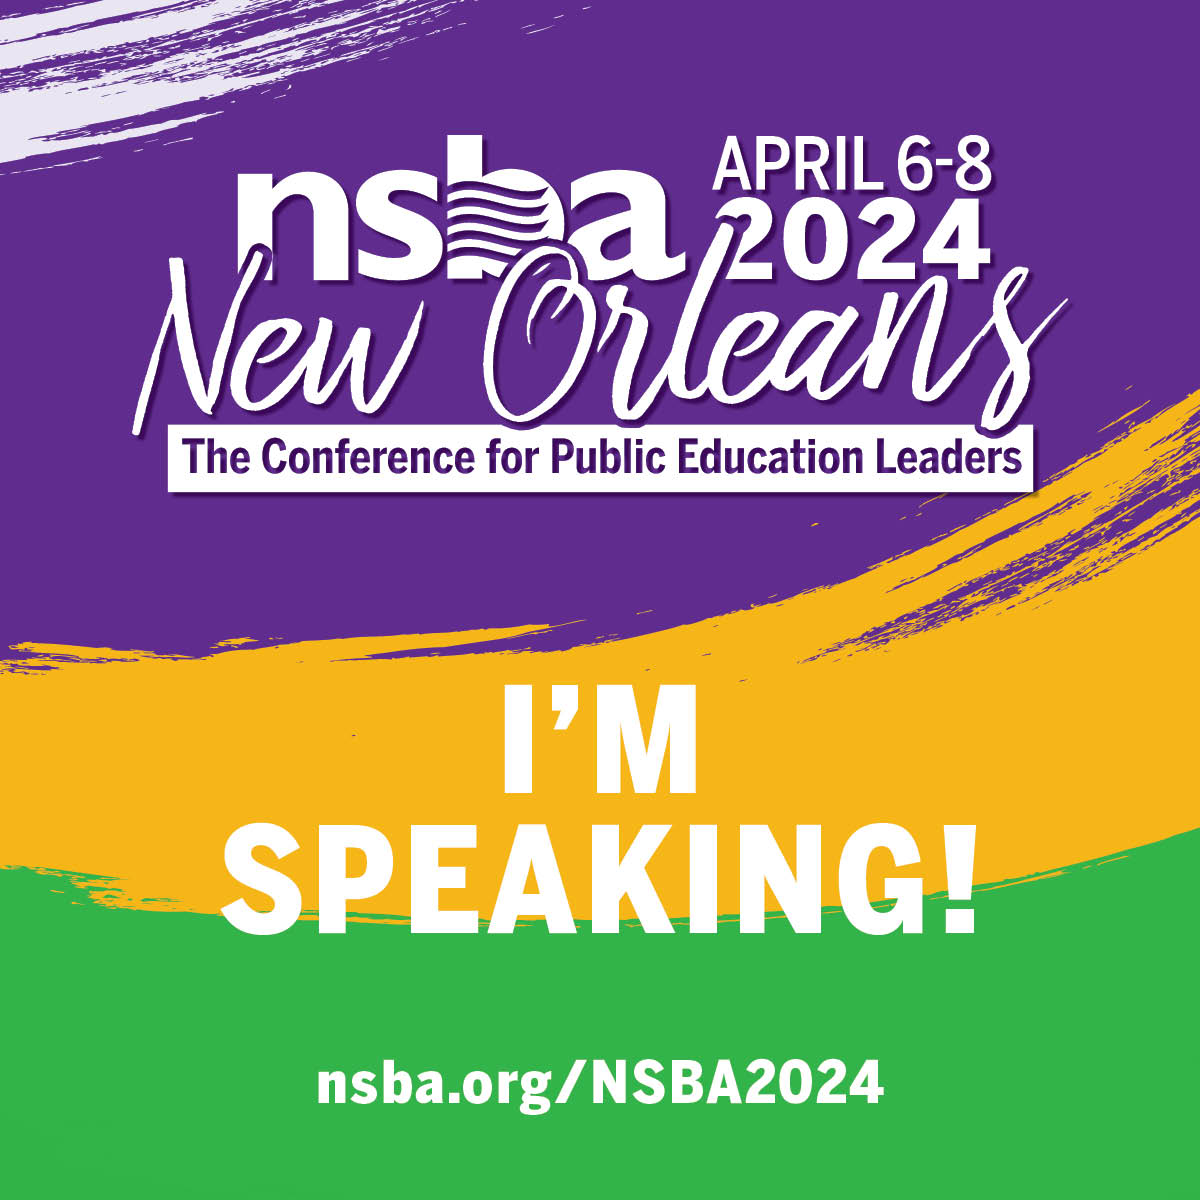 Looking forward to presenting on #specialeducationlaw this coming weekend at the National School Boards Association's Annual Conference in New Orleans! #NSBA24 #publiceducation #specialeducation #schoolboards #schoollaw #studentservices